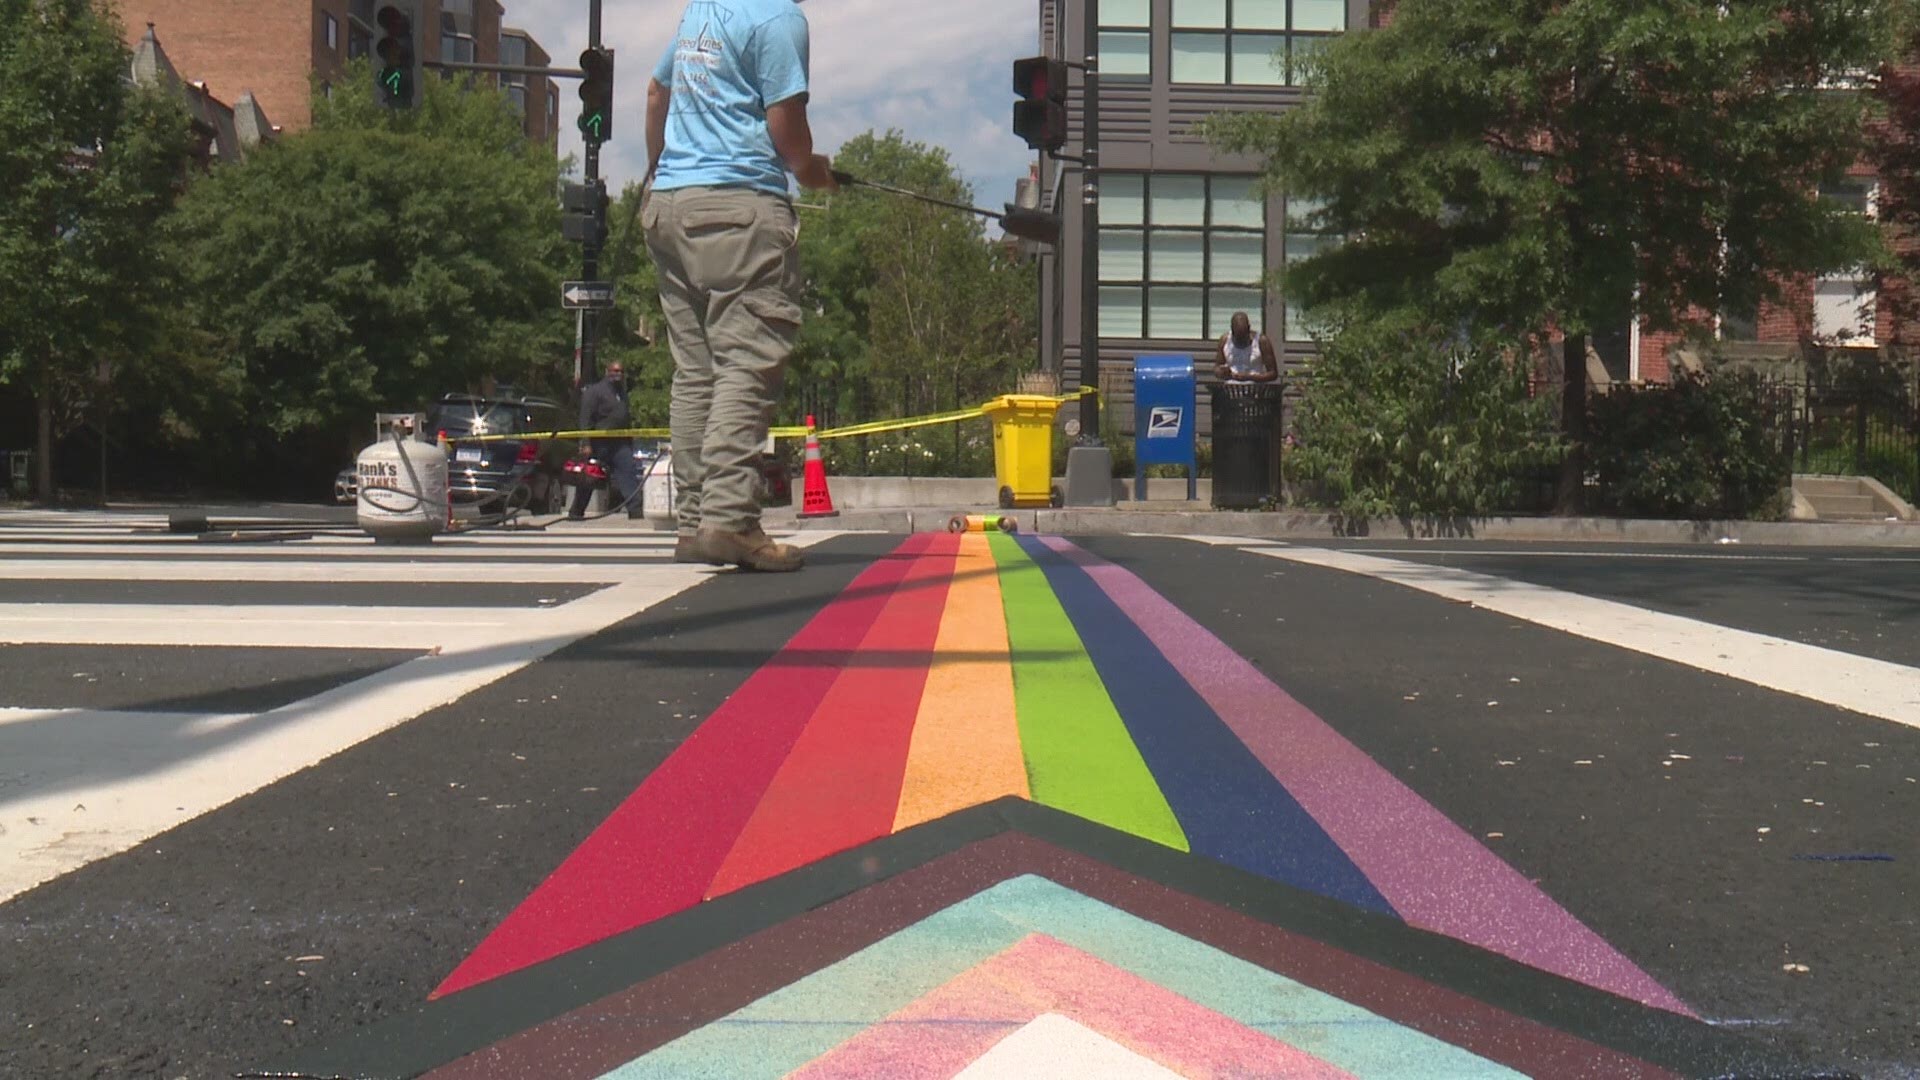 The crosswalk includes the colors of the Pride Flag, along with the Transgender Pride Flag colors and black and brown stripes to represent persons of color.